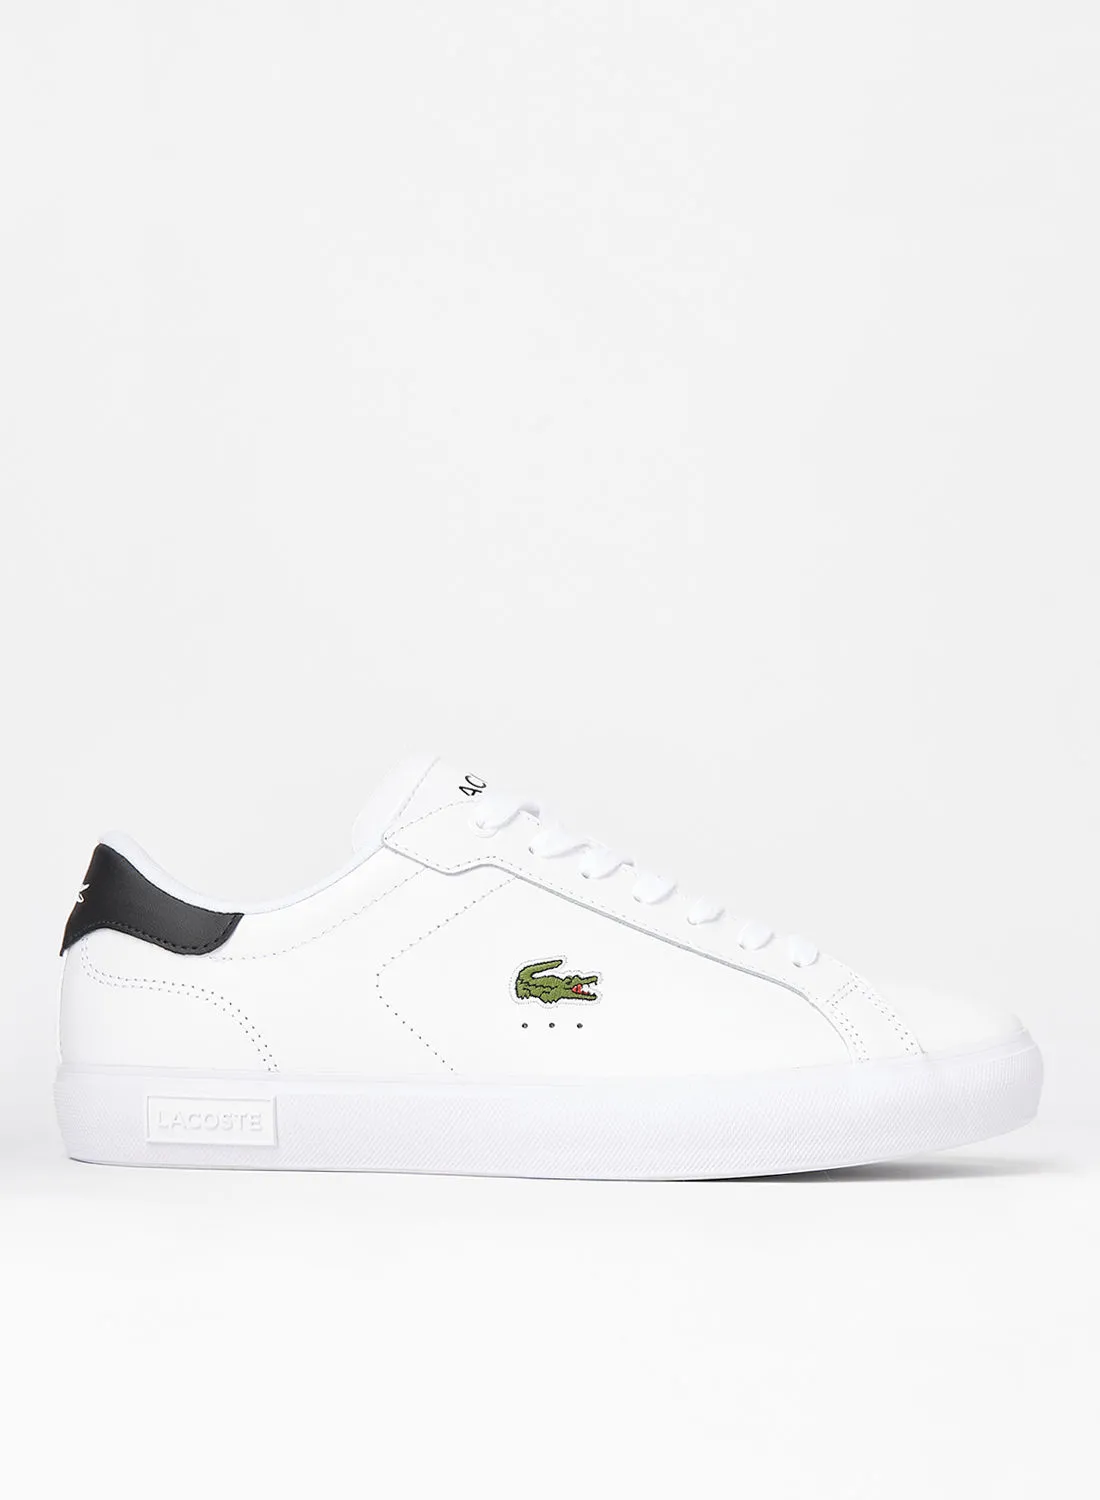 LACOSTE Powercourt Leather Sneakers White/Black